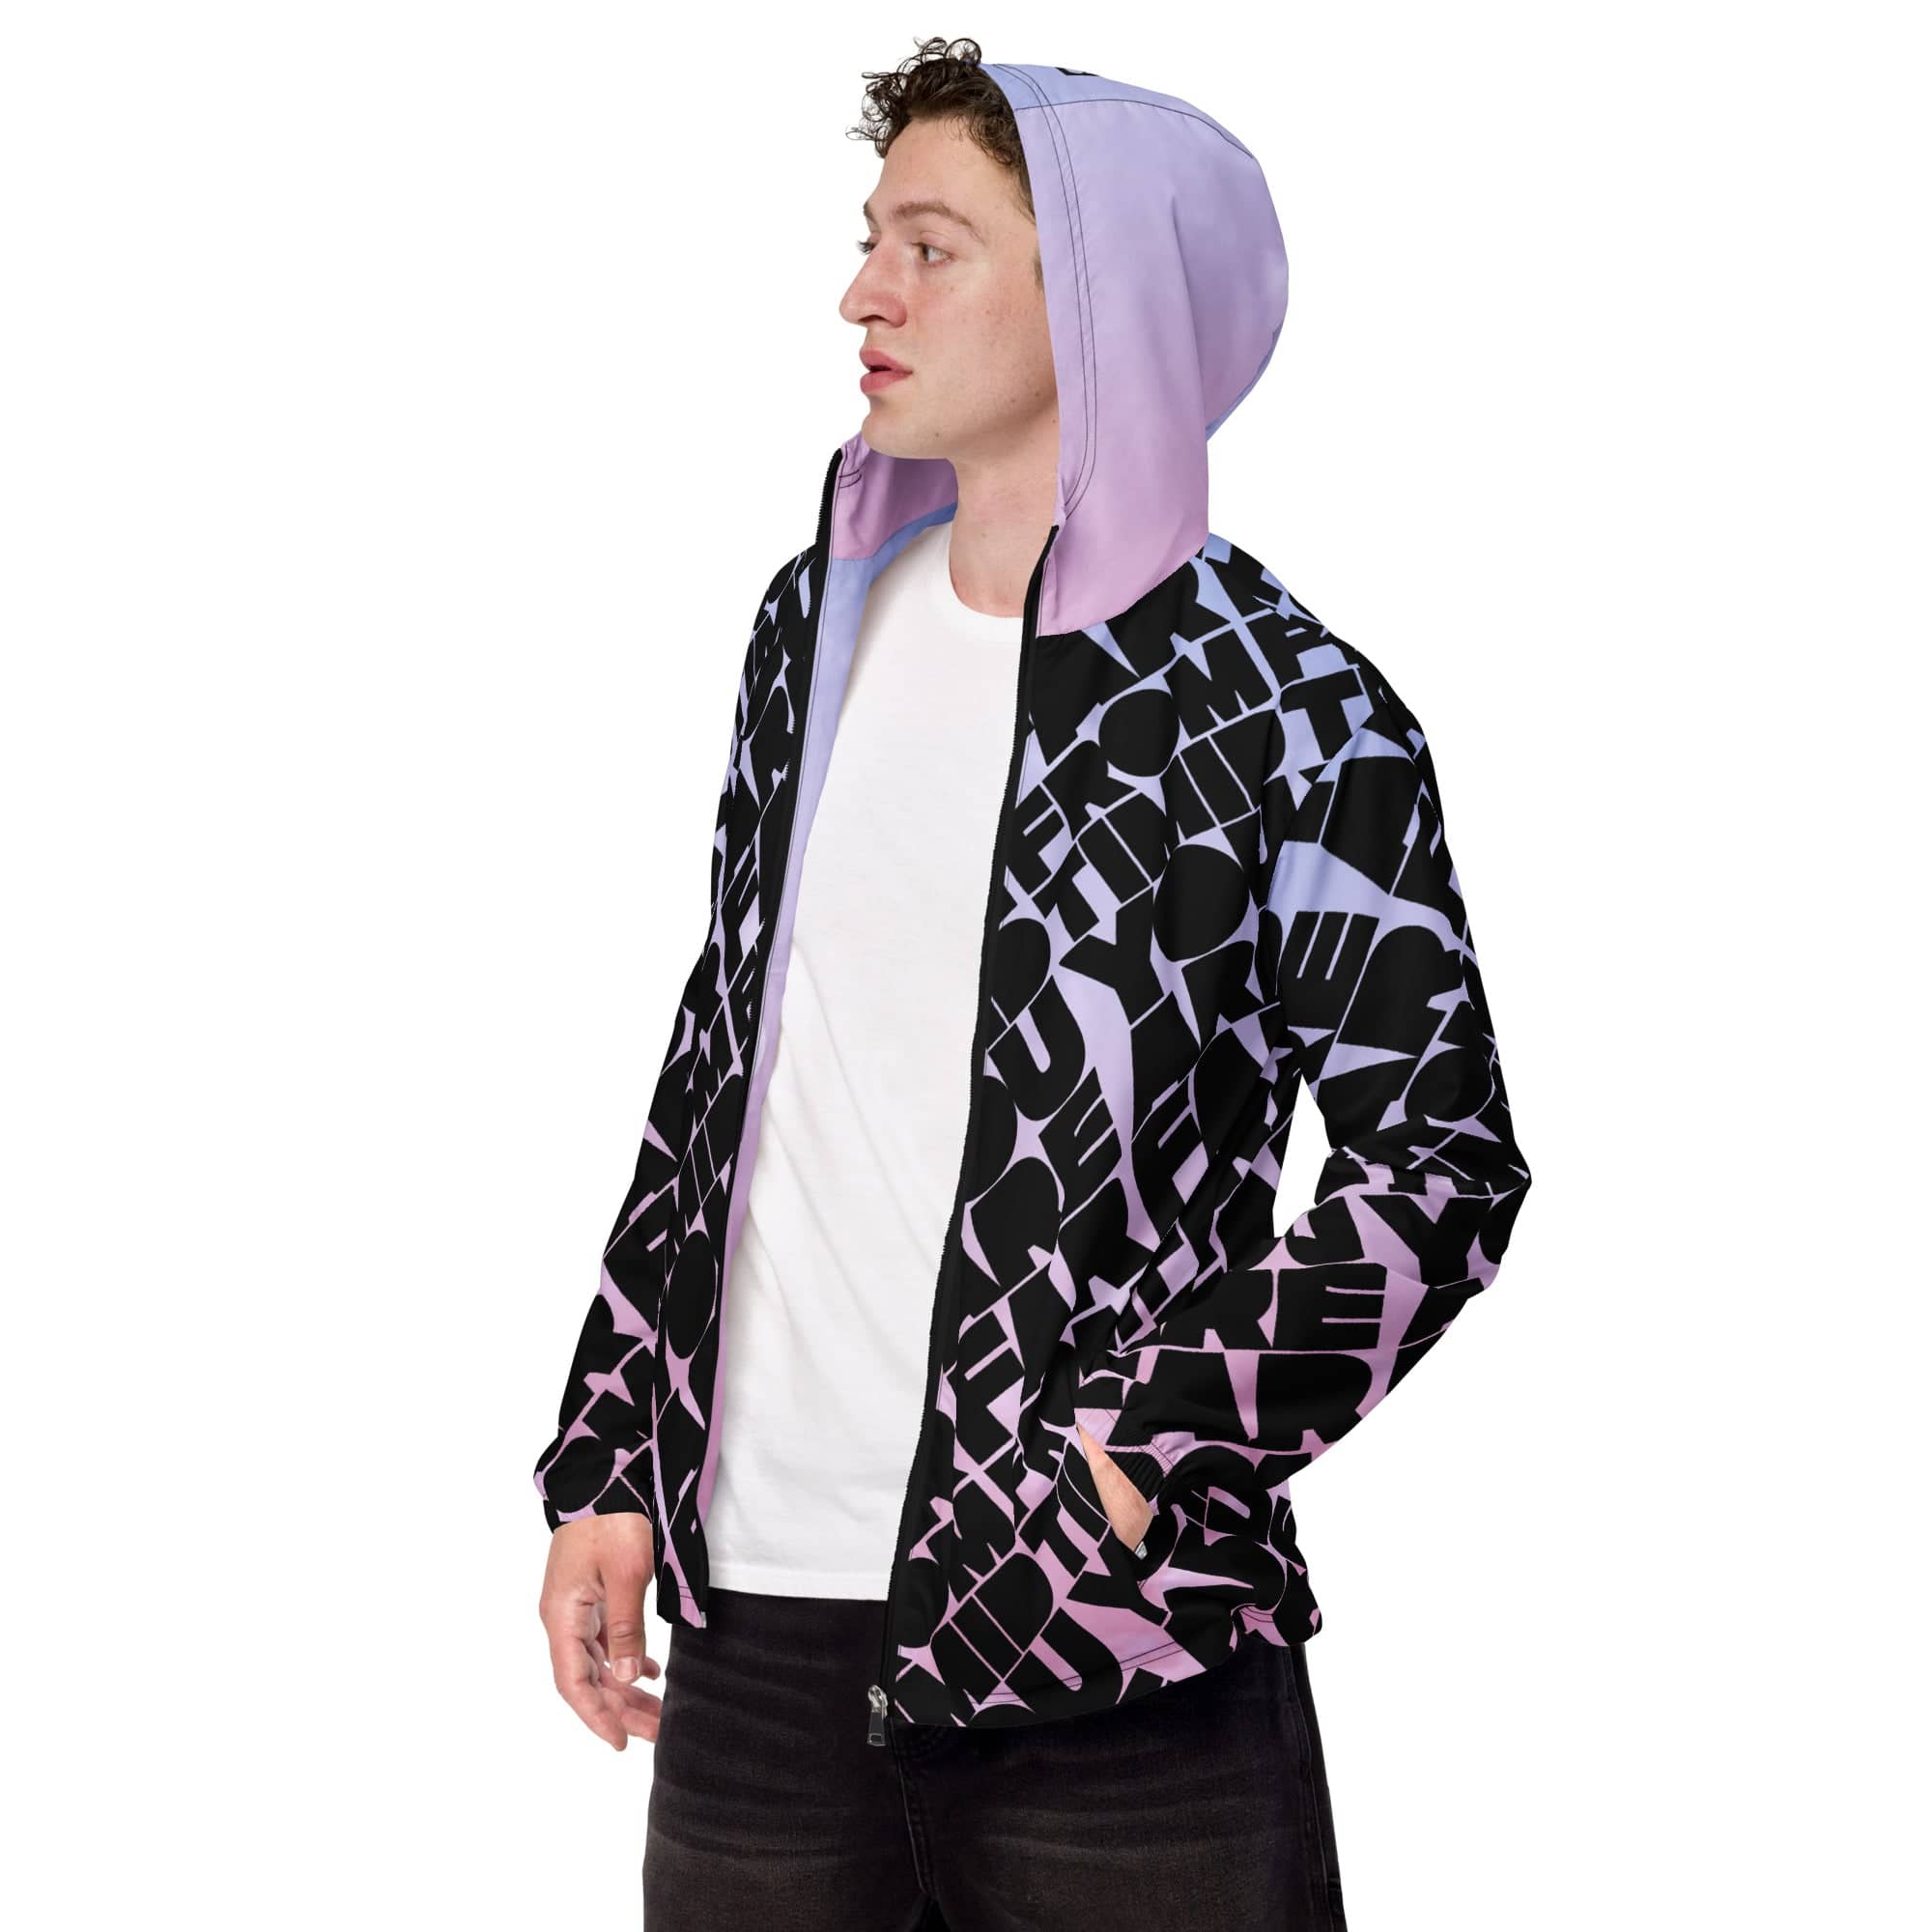 MEN'S YOU ARE FAR FROM TIMID WINDBREAKER - BLACK/WHITE CLOUDS